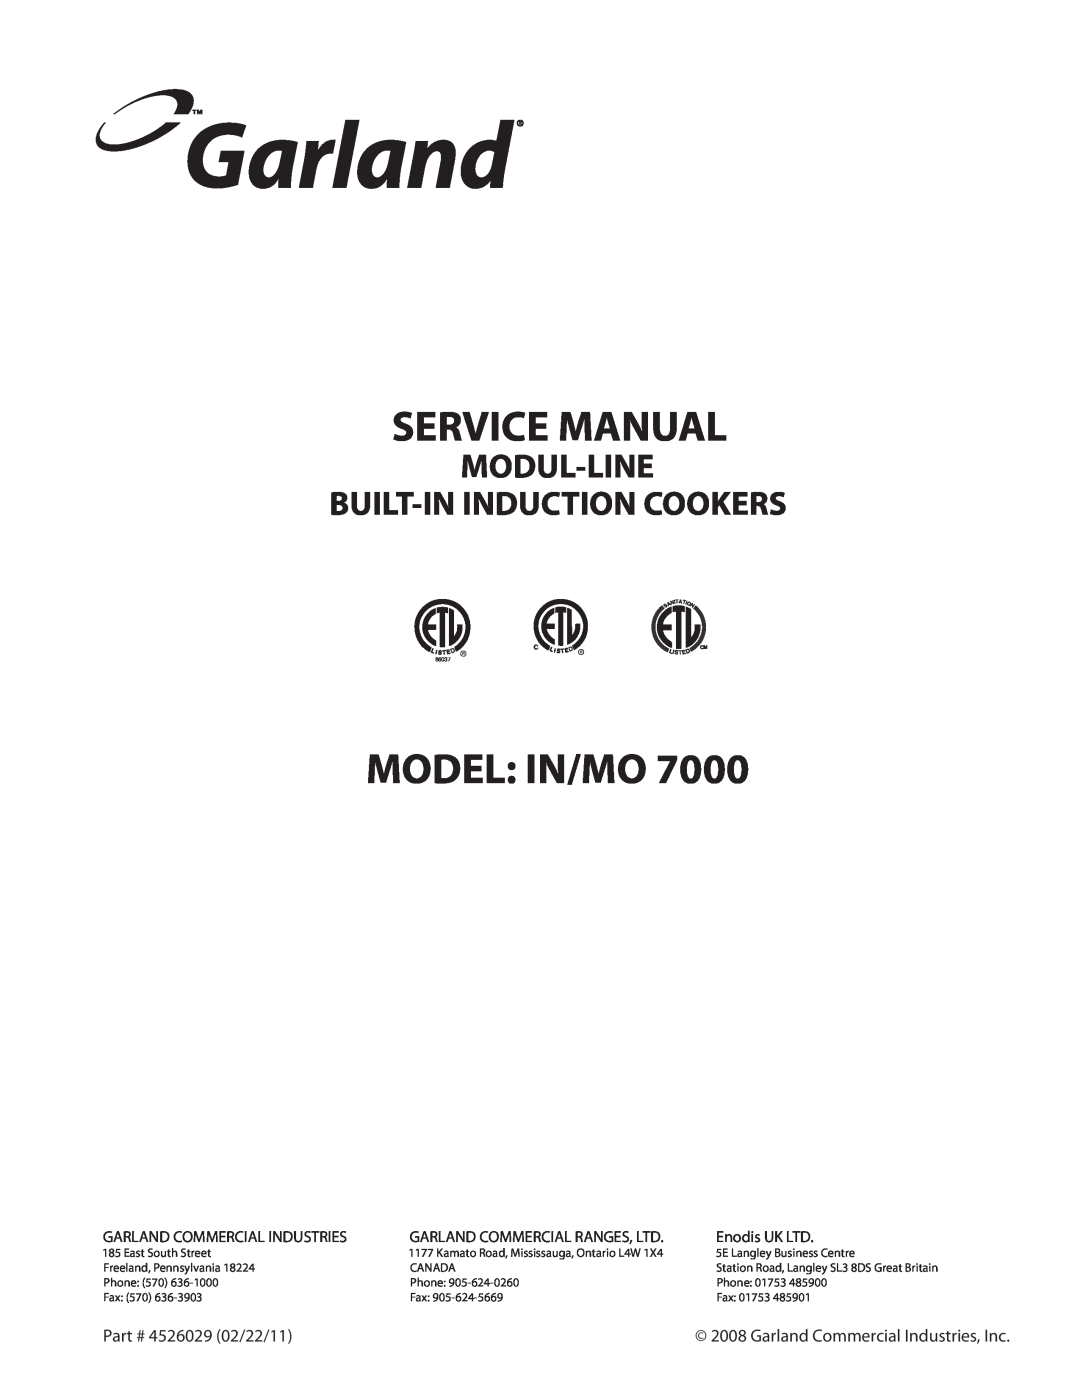 Garland 7000 service manual Model In/Mo, Modul-Line Built-Ininduction Cookers, Garland Commercial Industries 